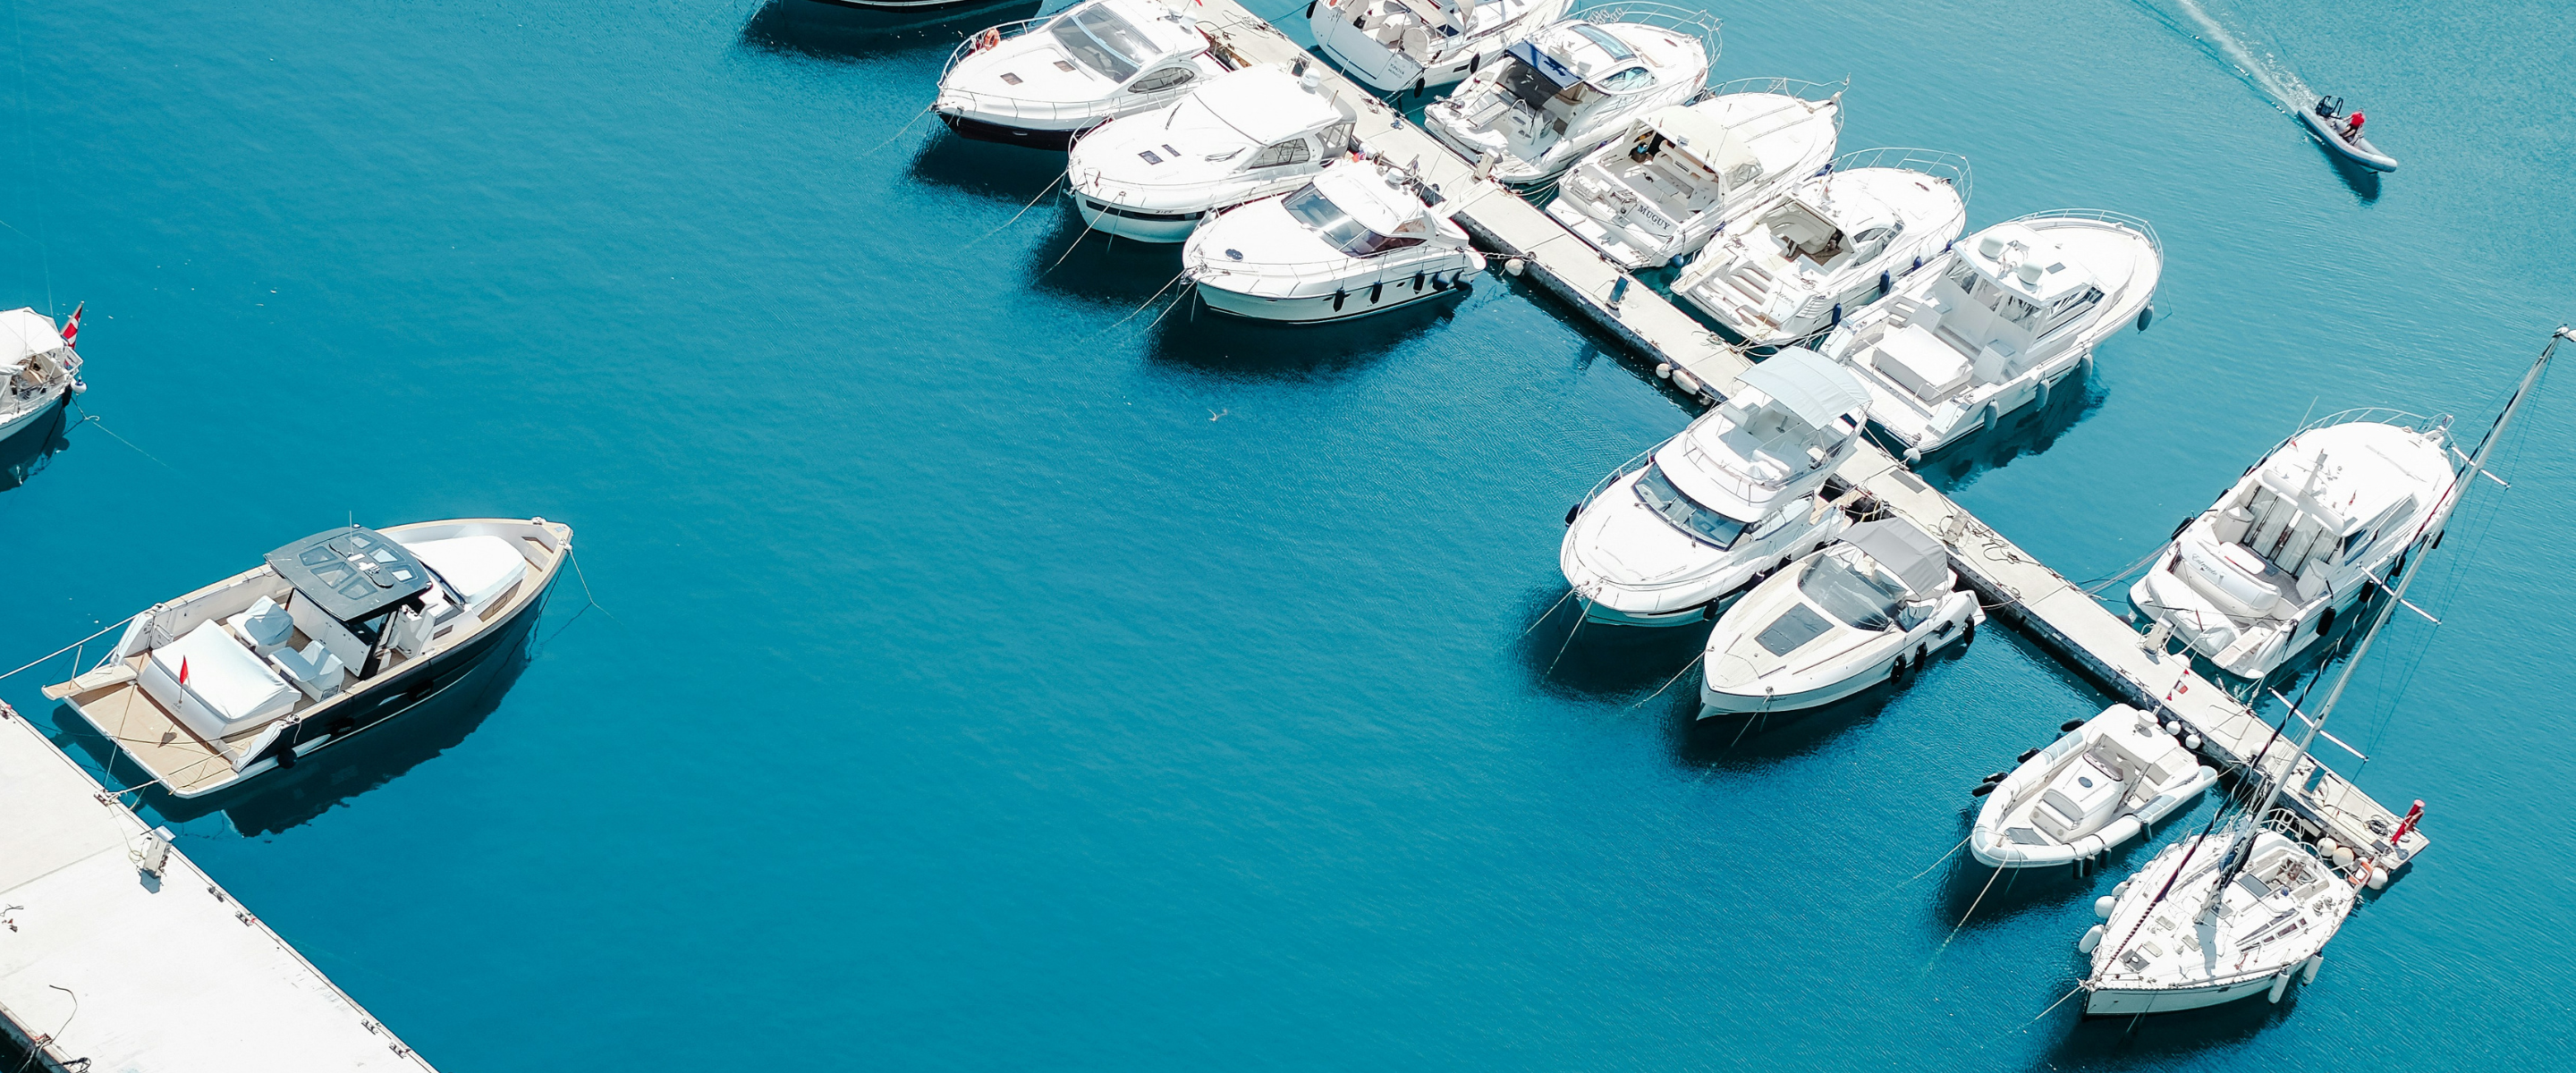 Isiteek product range page featuring a marina full of boats.